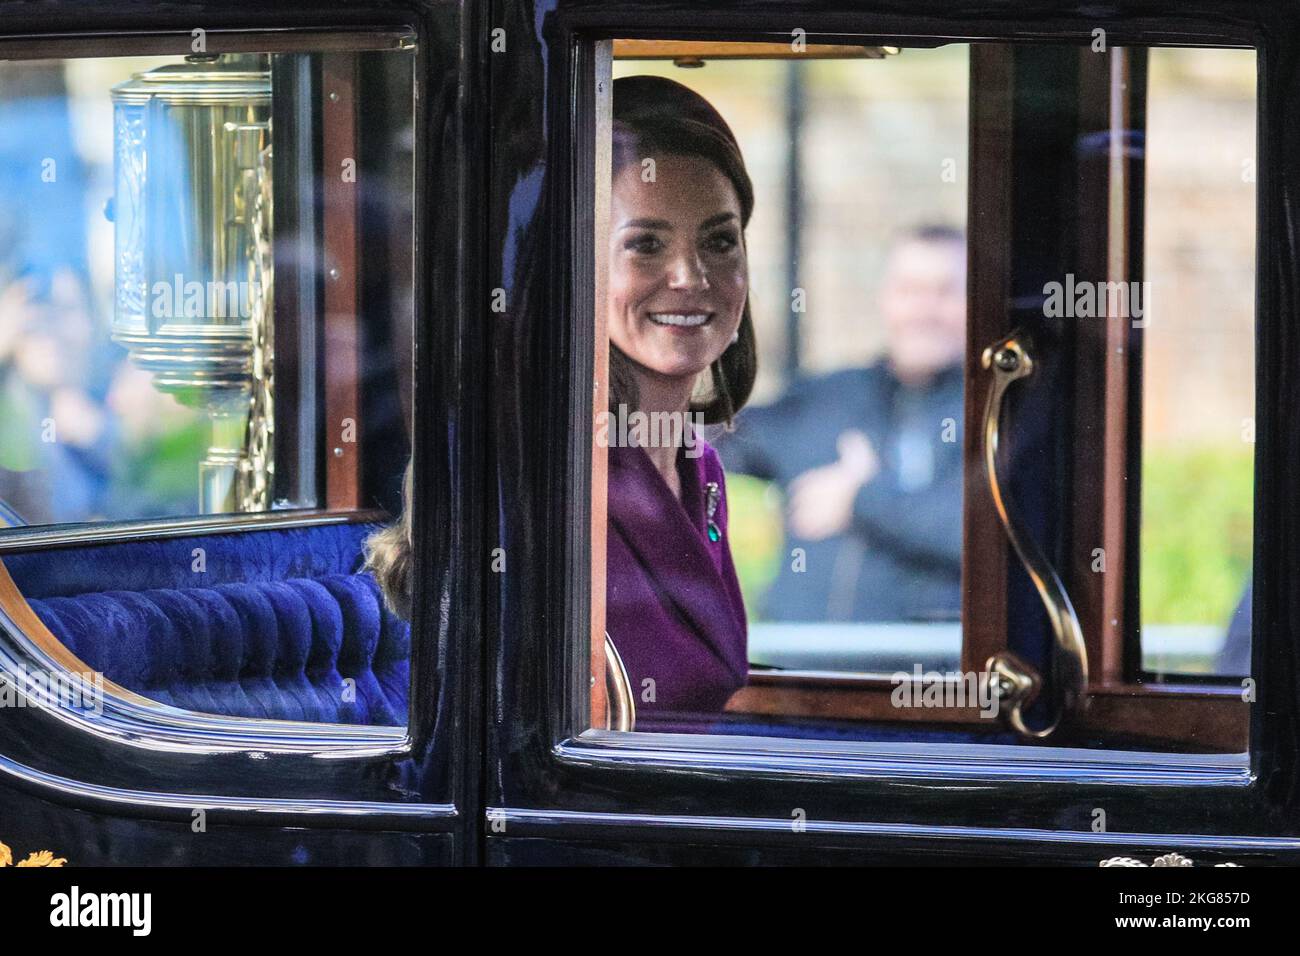 Westminster, London, UK. 22nd Nov, 2022. Catherine, the Princess of Wales, rides in a carriage with William, Prince of Wales. Members of the Royal Family, including the King and Queen Consort, and Prince and Princess of Wales, together with the President of South Africa, Cyril Ramaphosa, ride in carriages along the Mall to Buckingham Palace, for the State Visit of President Ramaphosa. They are accompanied by the Kings' Troop and military bands for the occasion. Stock Photo